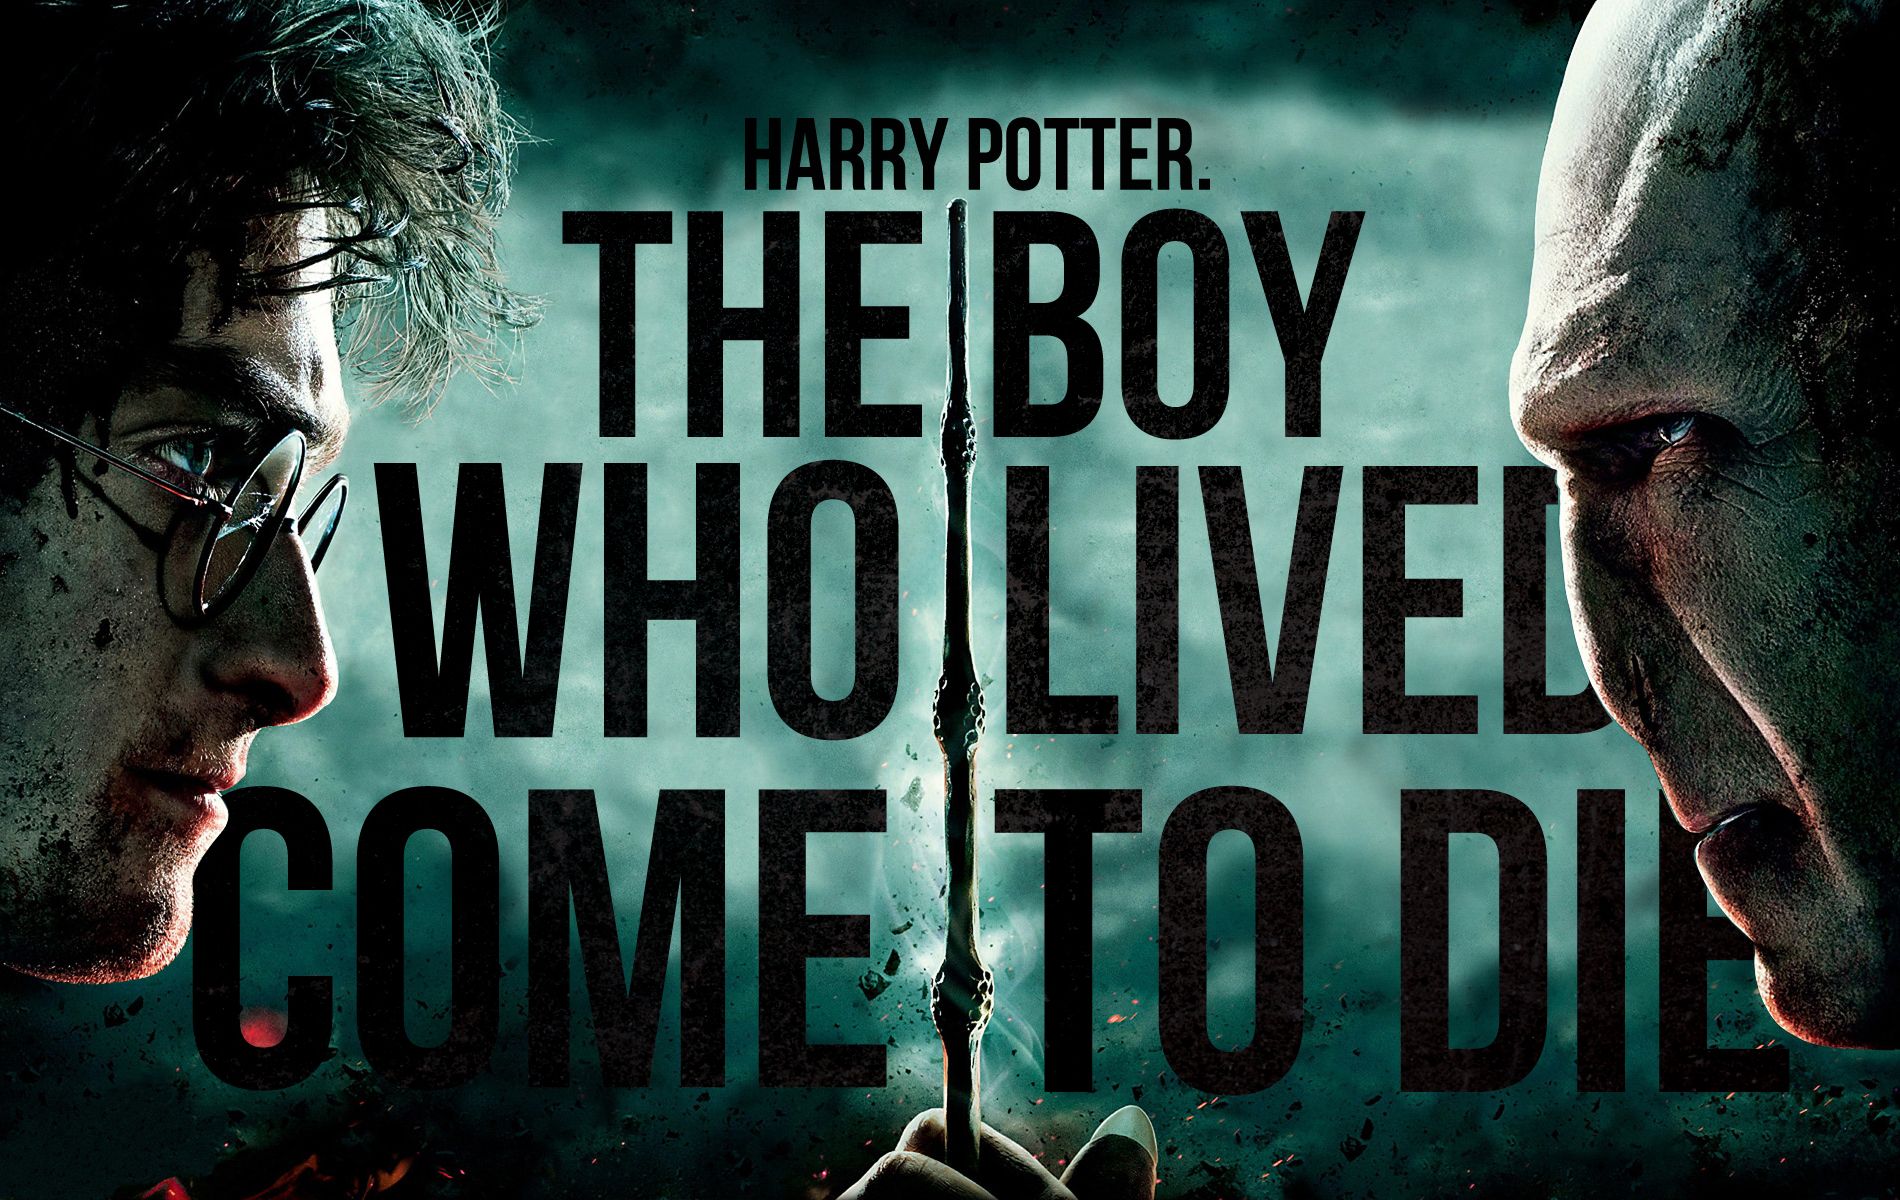 Harry Potter And The Deathly Hallows - HD Wallpaper 